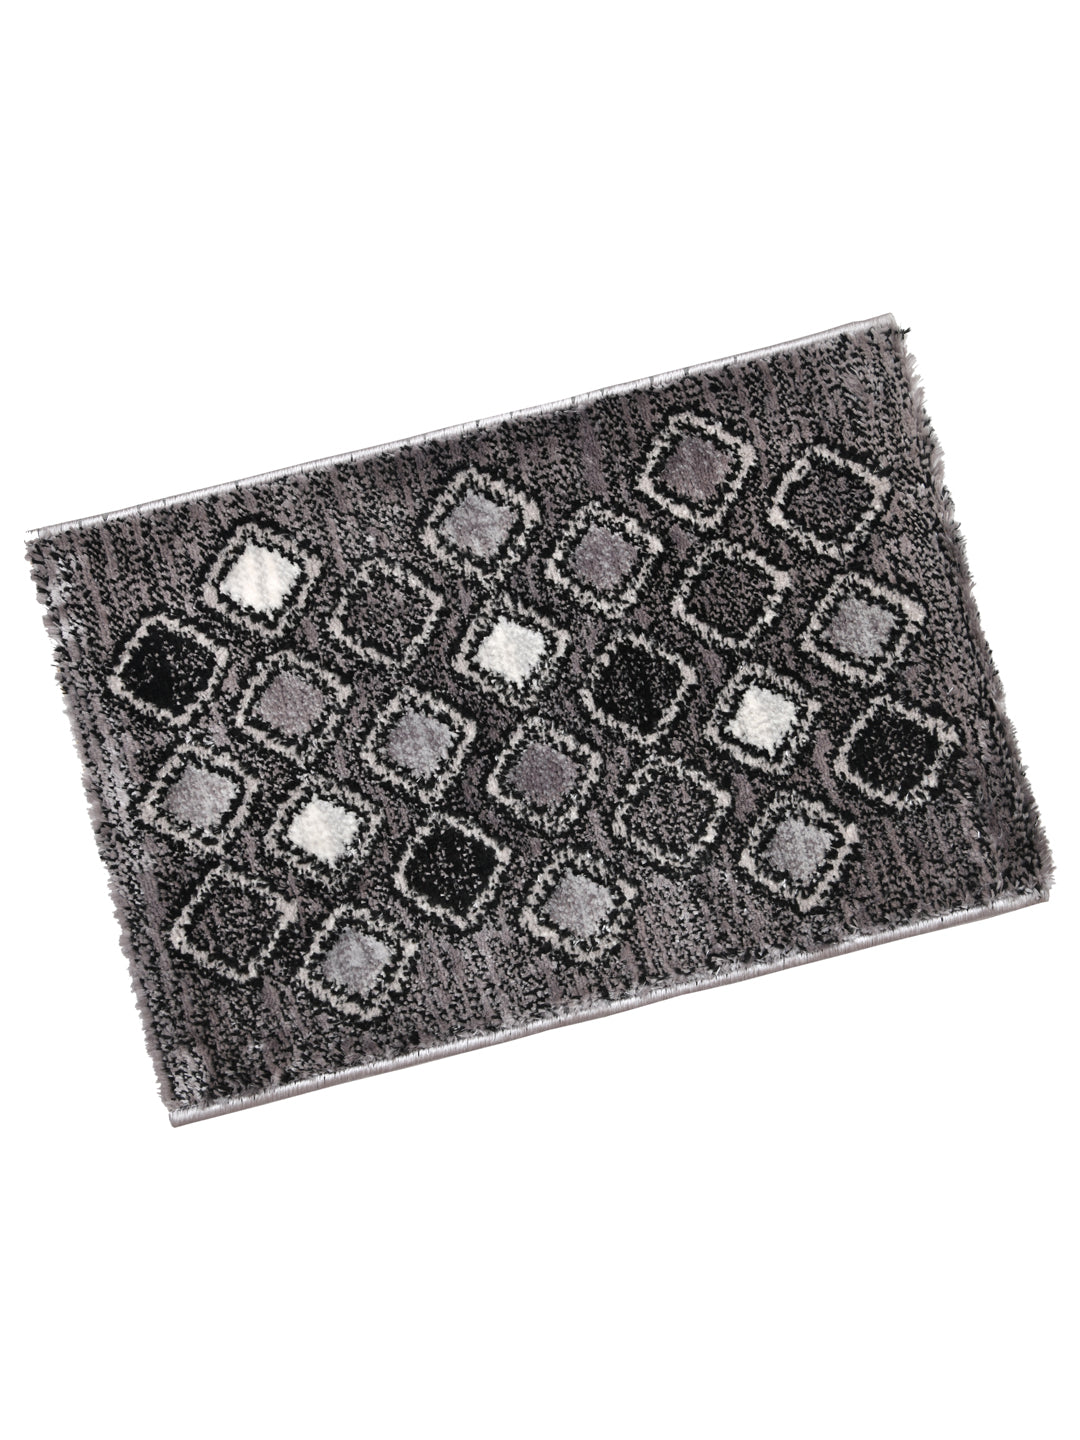 Doormat With Anti Skid Backing; 16x24 Inches; Black Grey Geometric